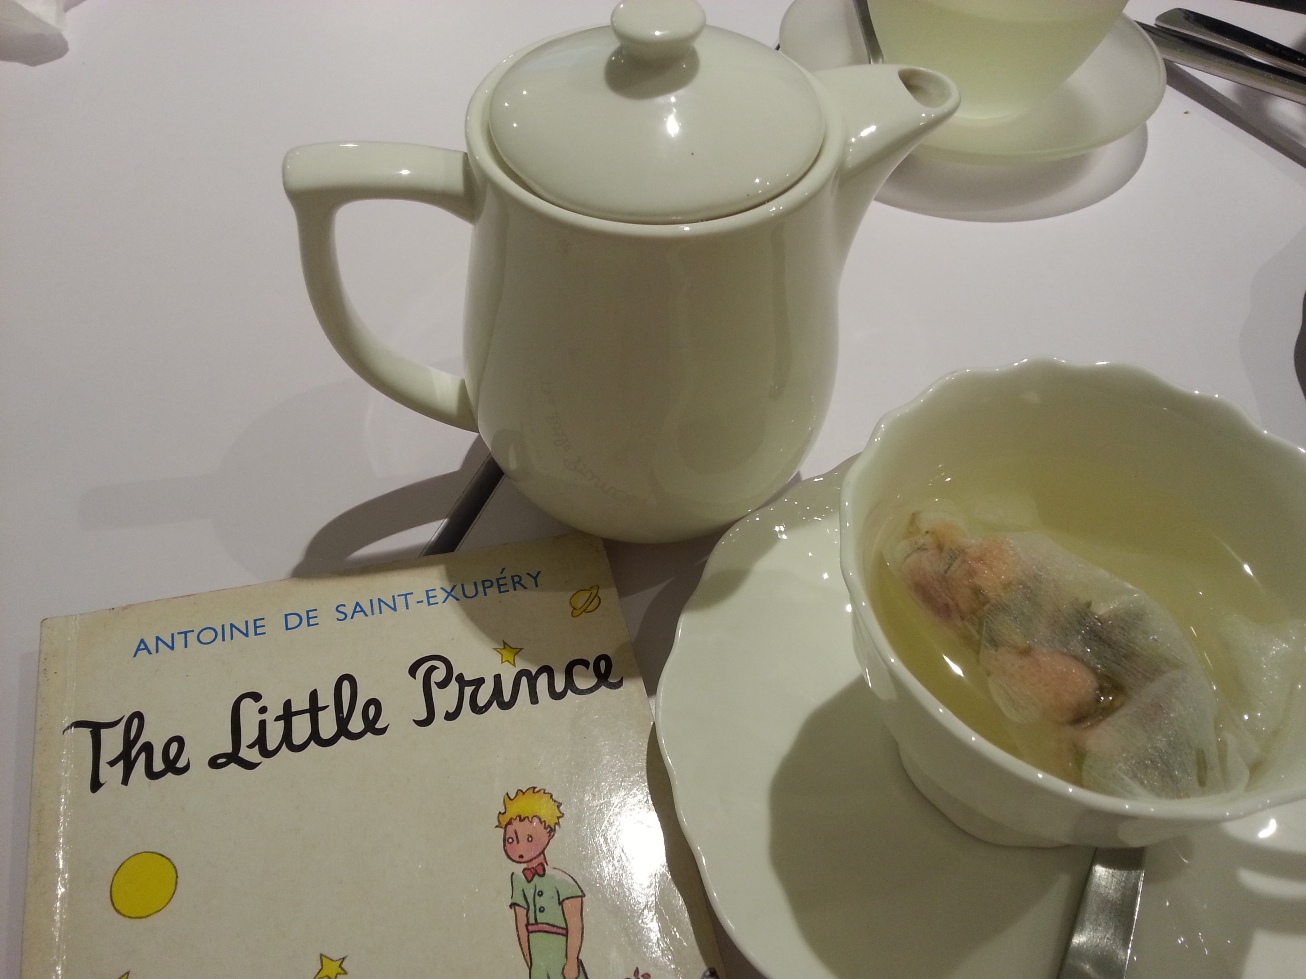 The Little Prince Creamery in Toa Payoh